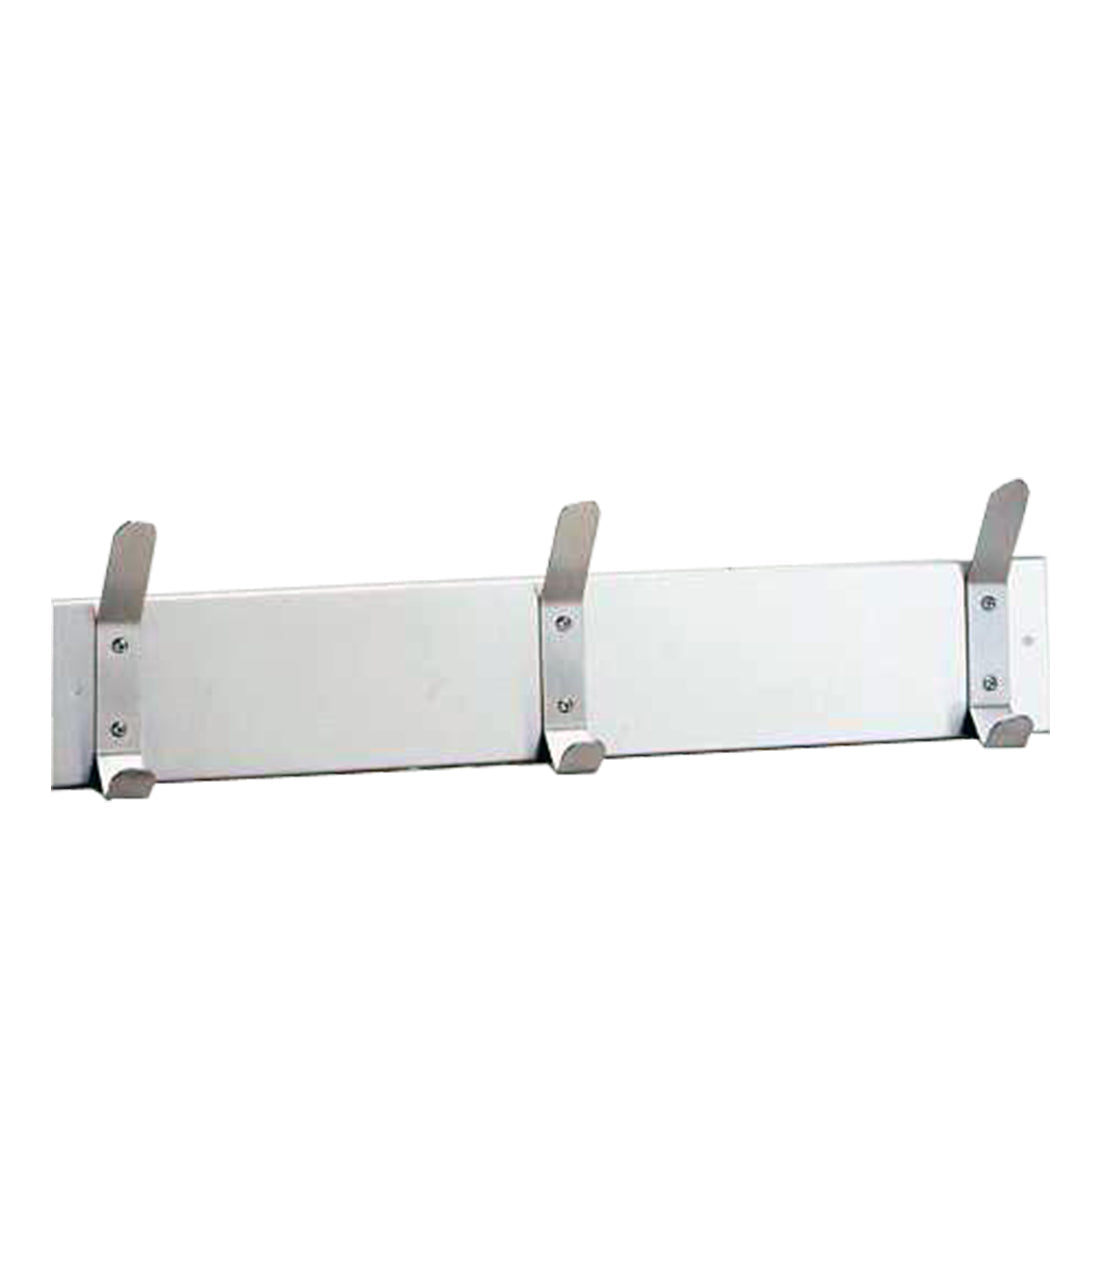 The Bobrick B-232x24 is a hat and coat hook strip in stainless steel.